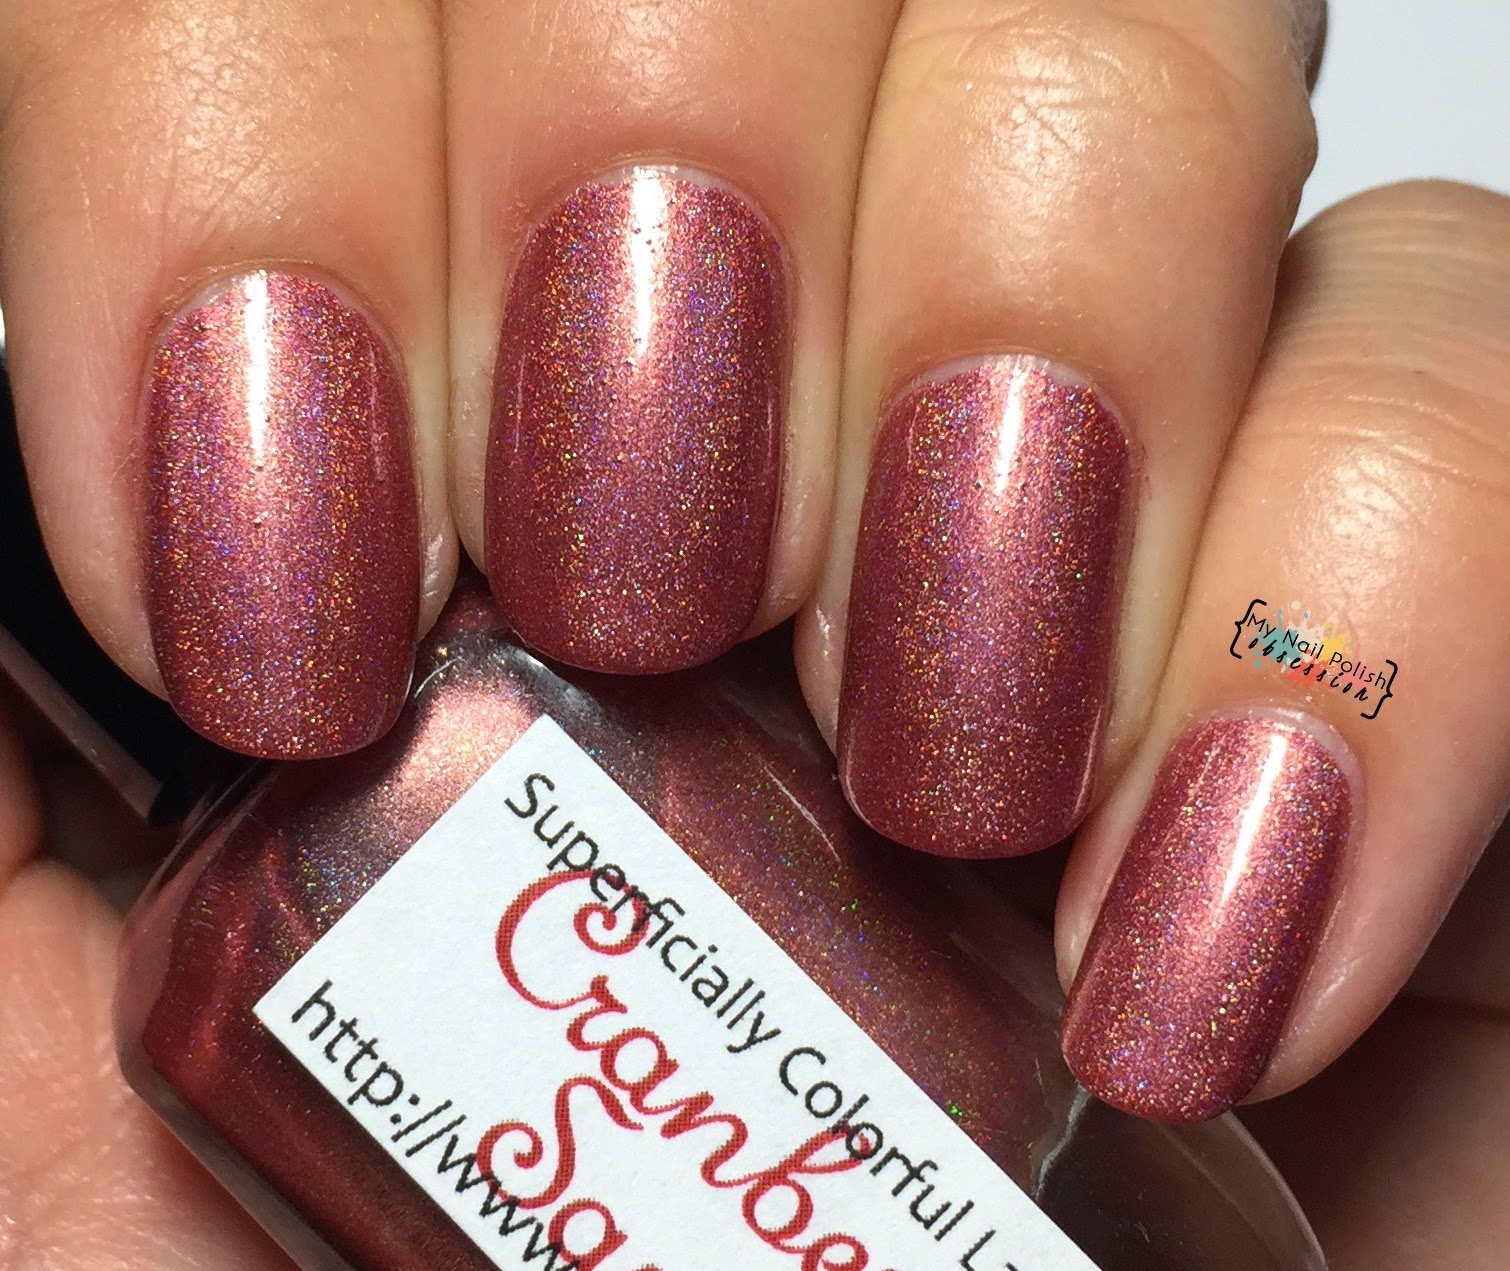 Superficially Colorful Lacquer Cranberry Sauce